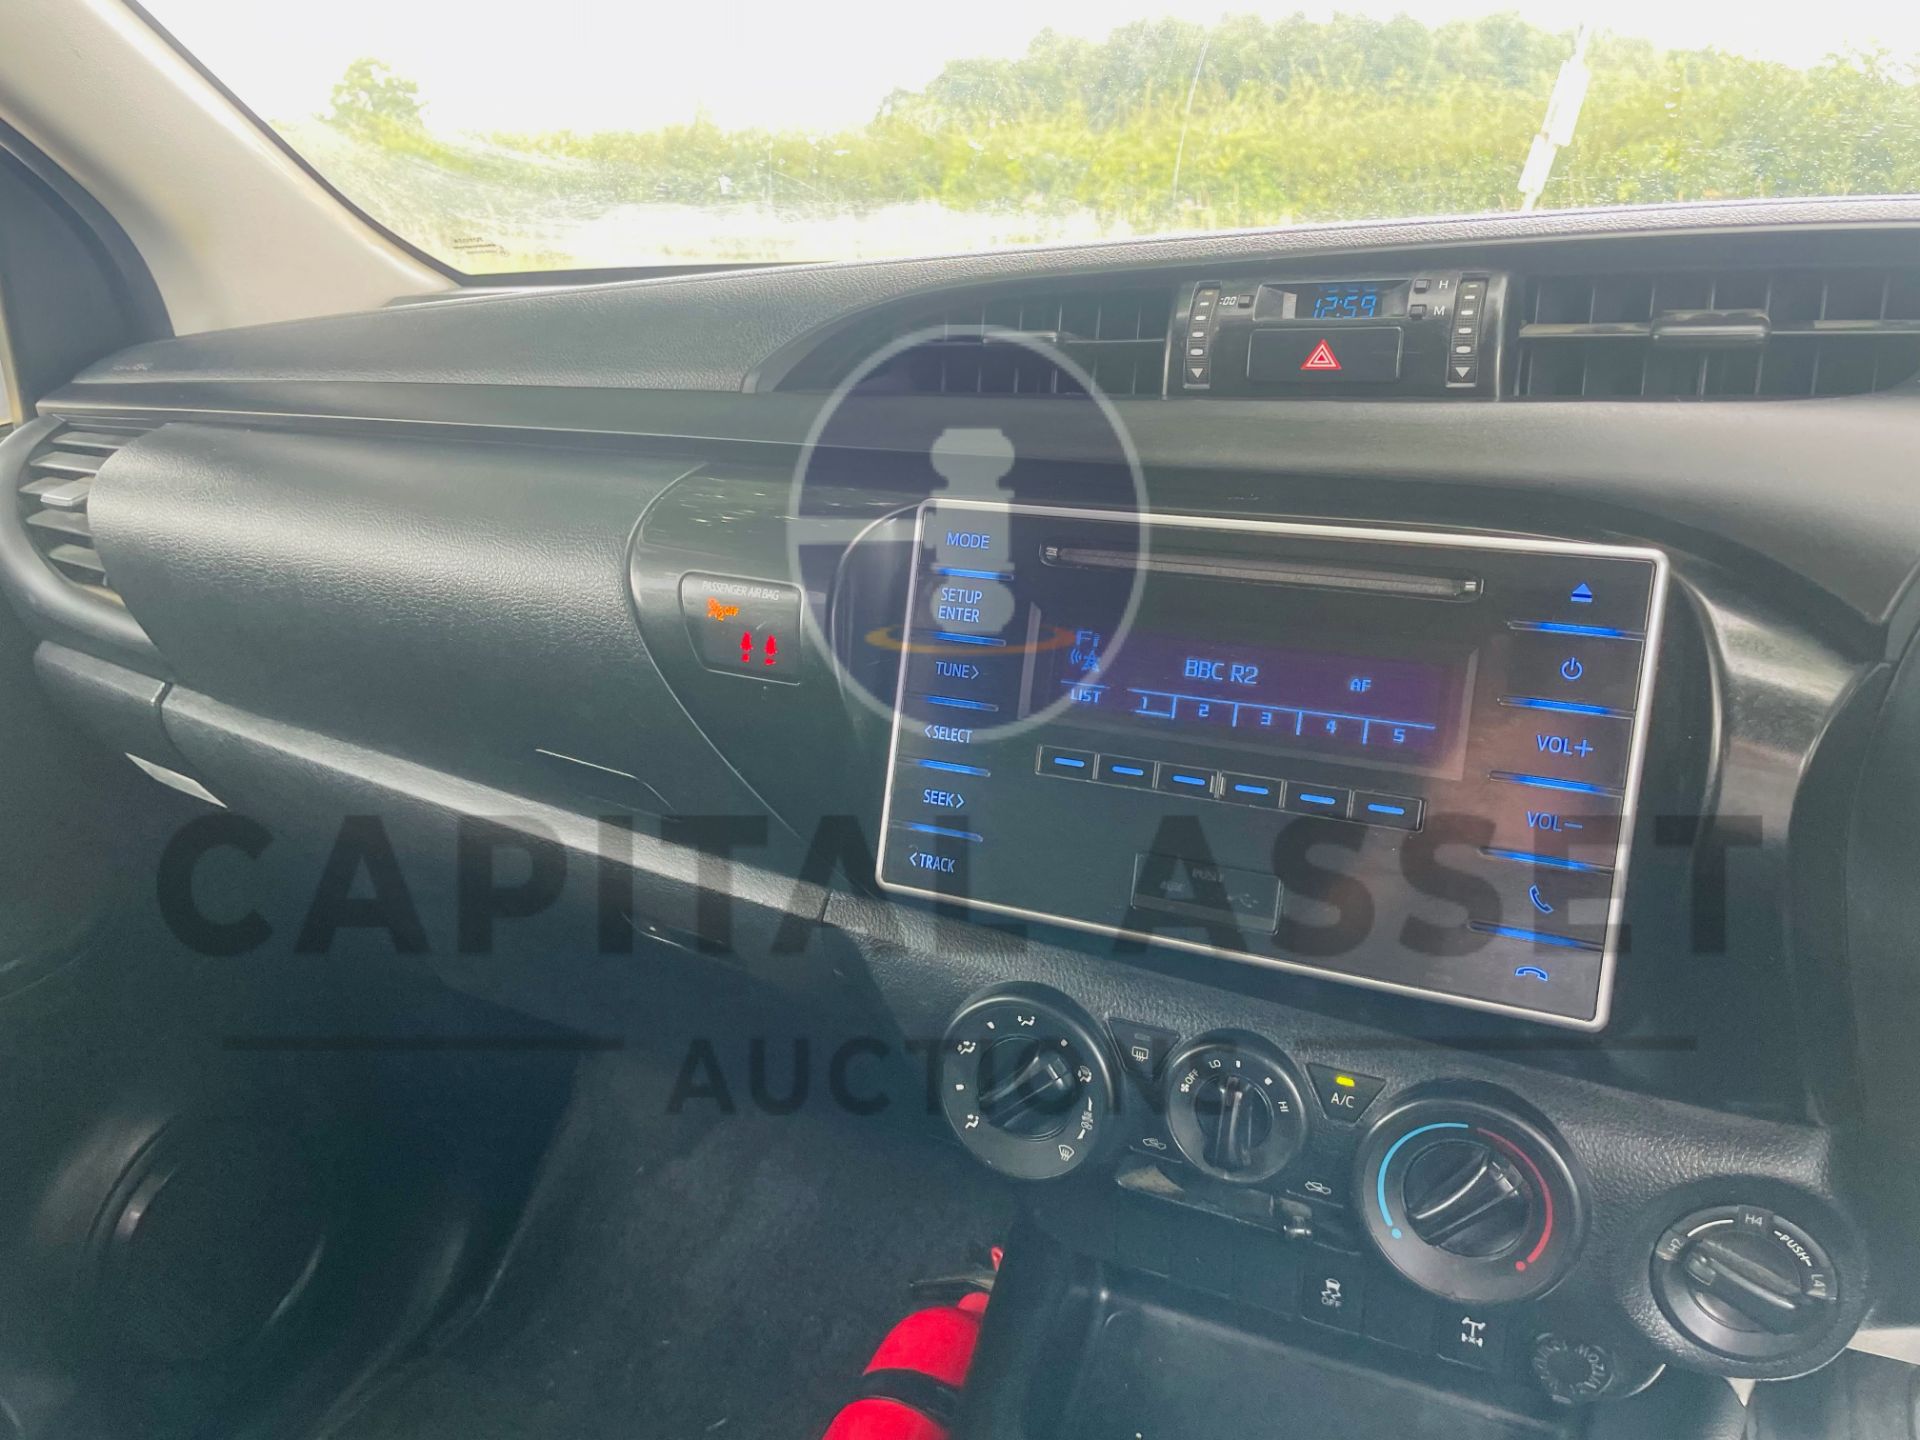 TOYOTA HILUX *DOUBLE CAB PICK-UP* (2018 - EURO 6) 2.4 D4-D - 6 SPEED (1 OWNER) *ULTRA LOW MILES* - Image 33 of 40